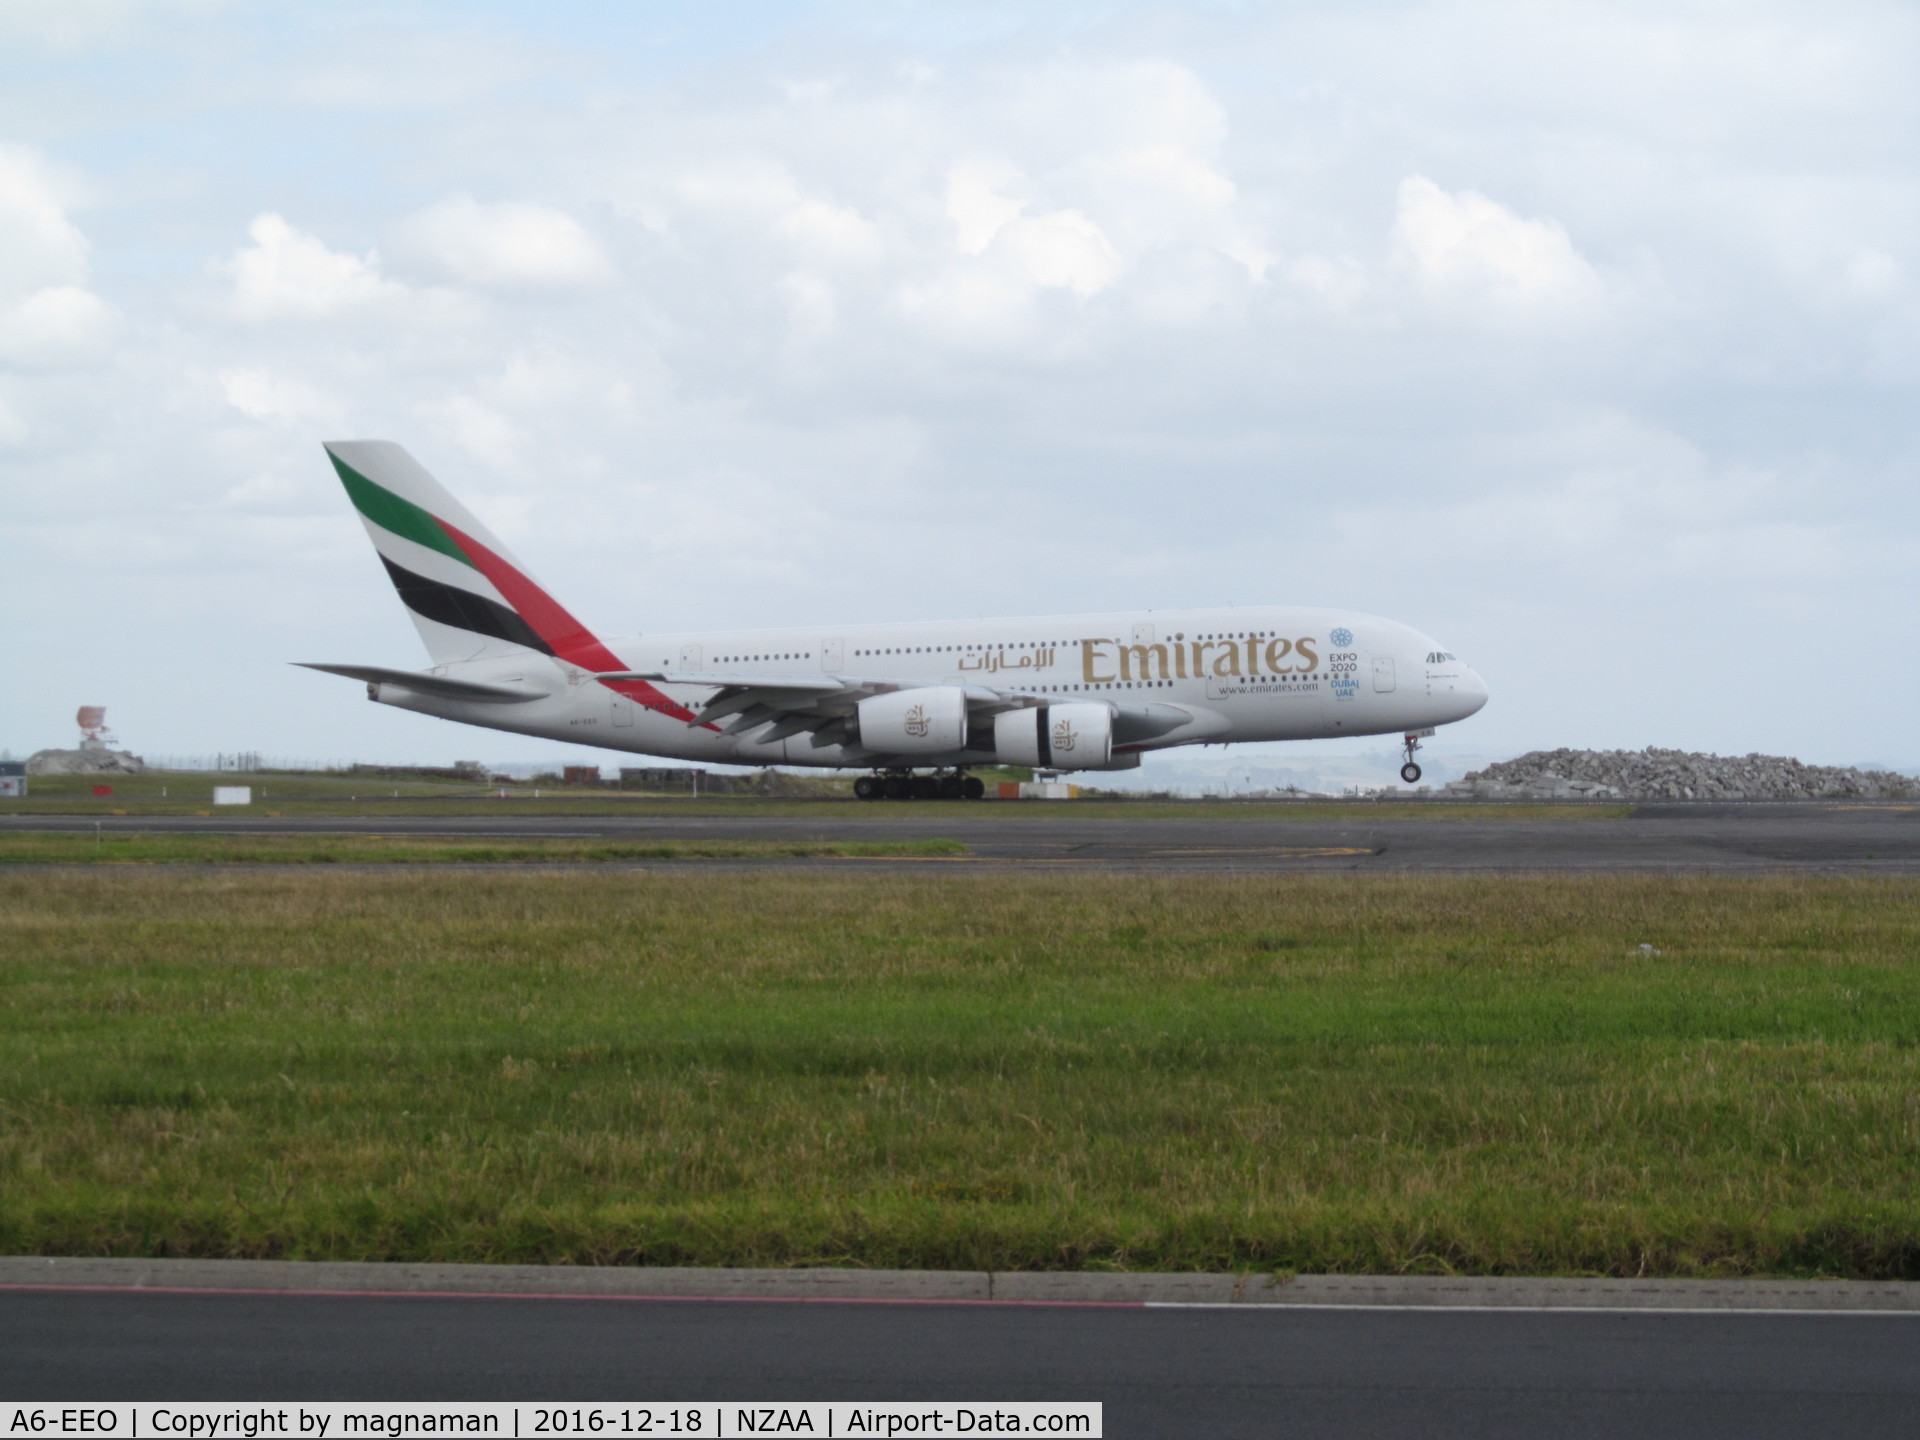 A6-EEO, 2013 Airbus A380-861 C/N 136, about touch down